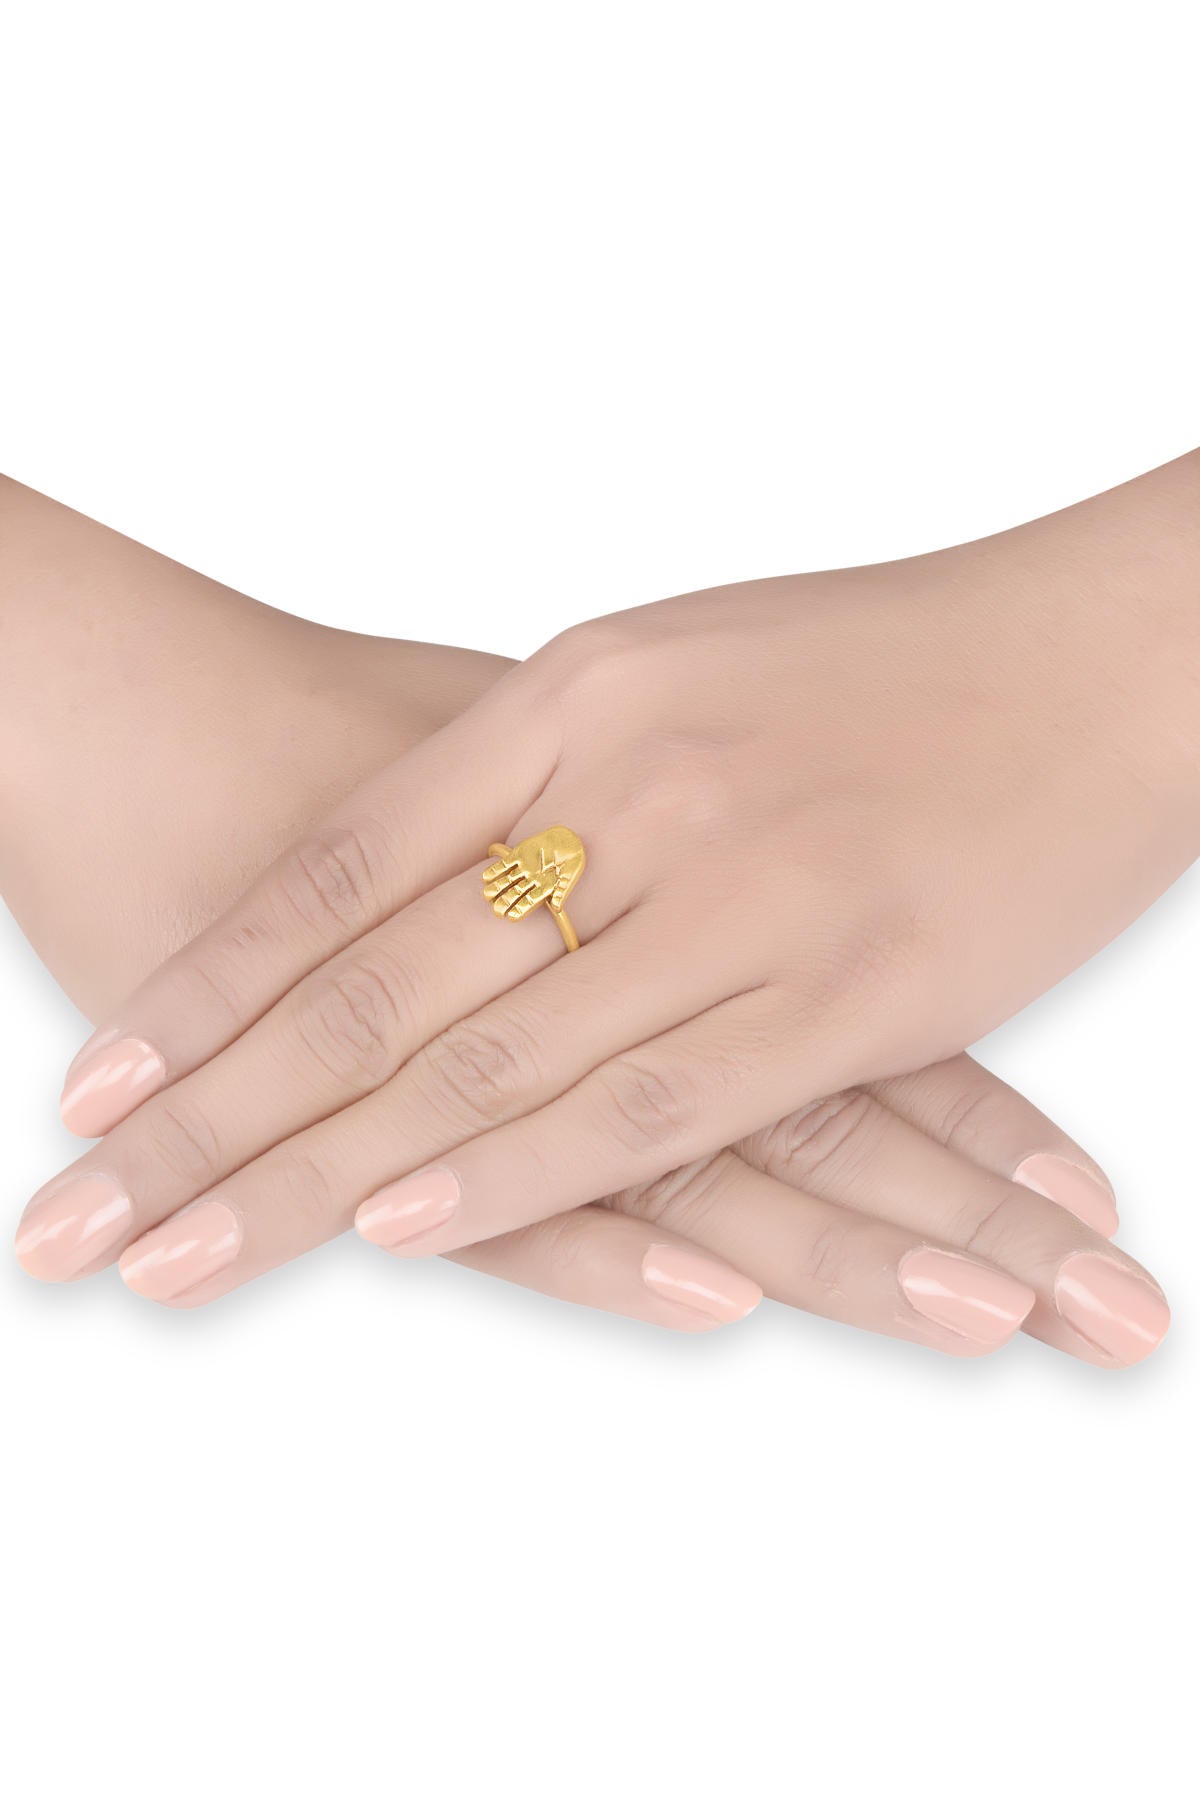 Palm Gold Plated Ring